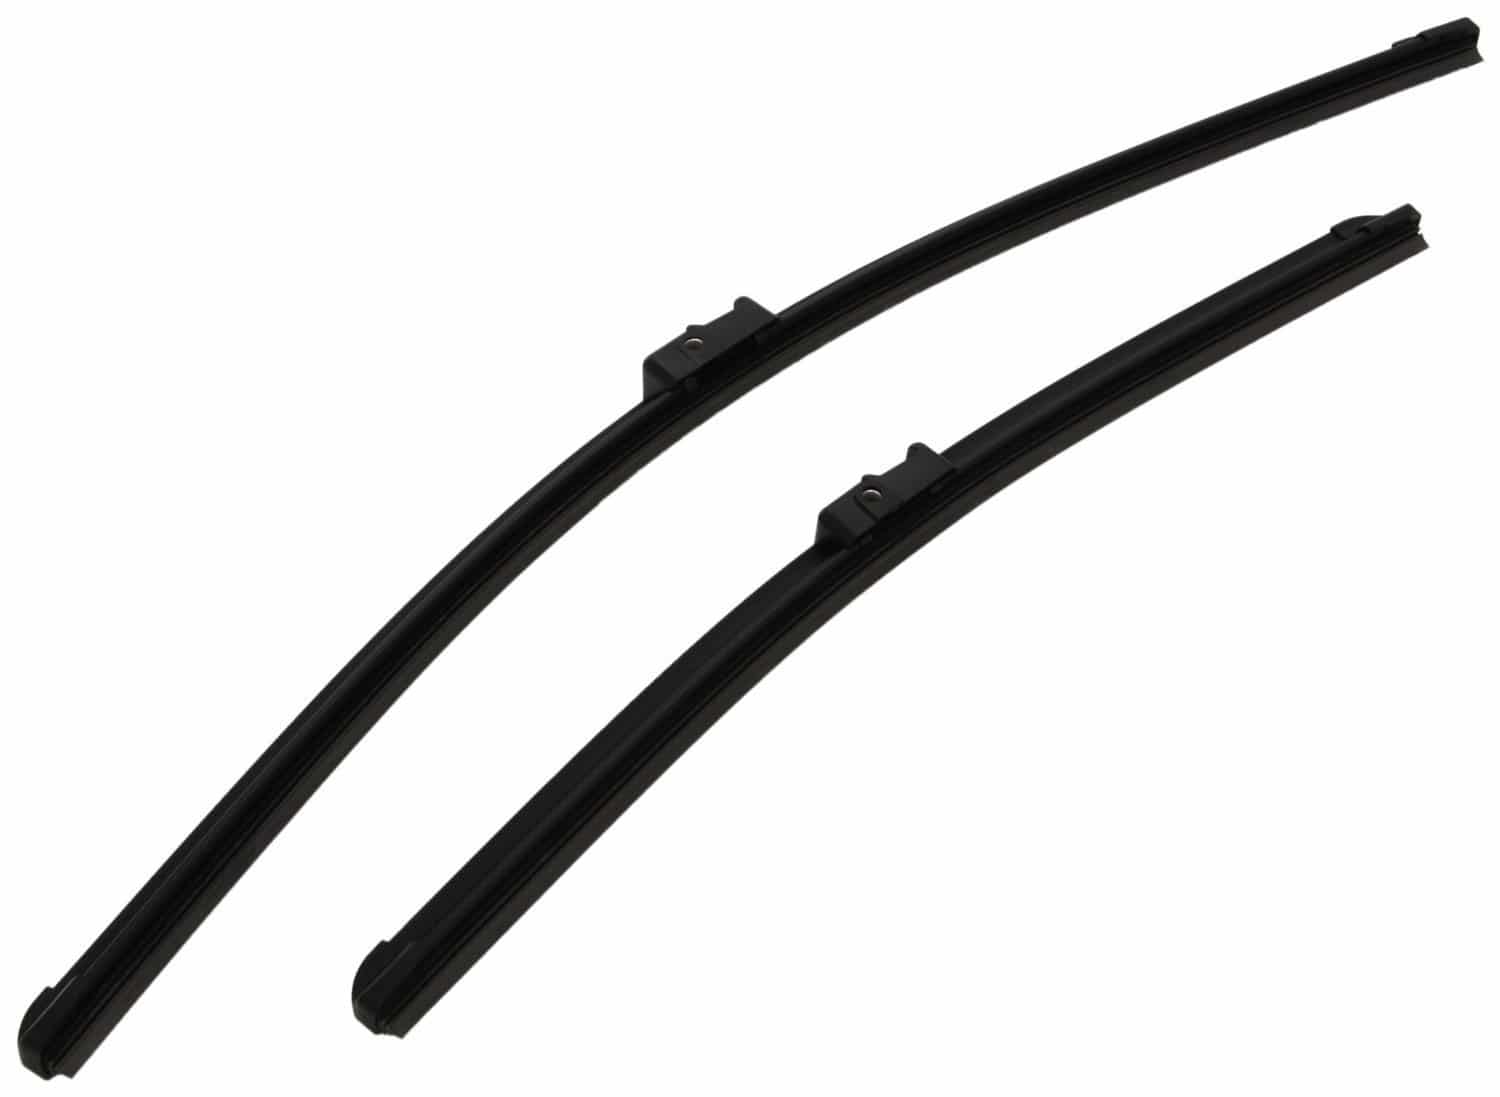 Bosch SP21/18S Wiper Blades for Renault Clio Fiat Punto and Other Cars